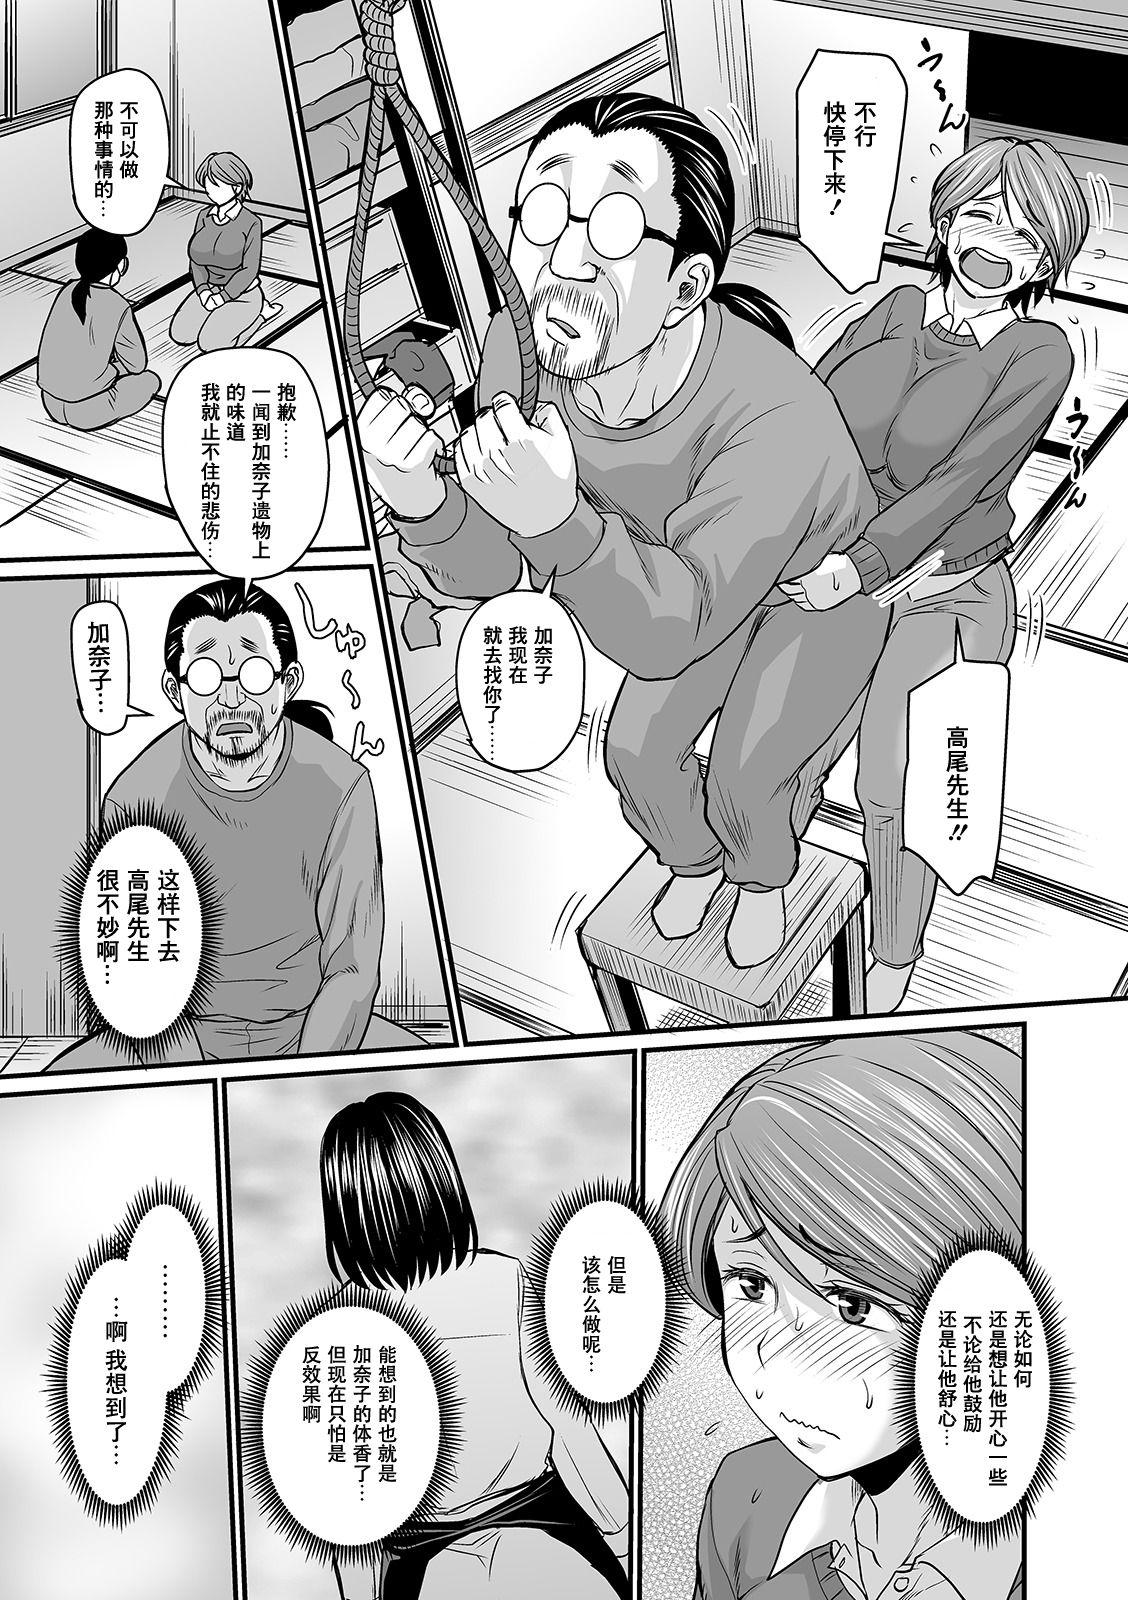 Old And Young ニオイ妻+特濃ニオイ妻 Nylon - Page 5